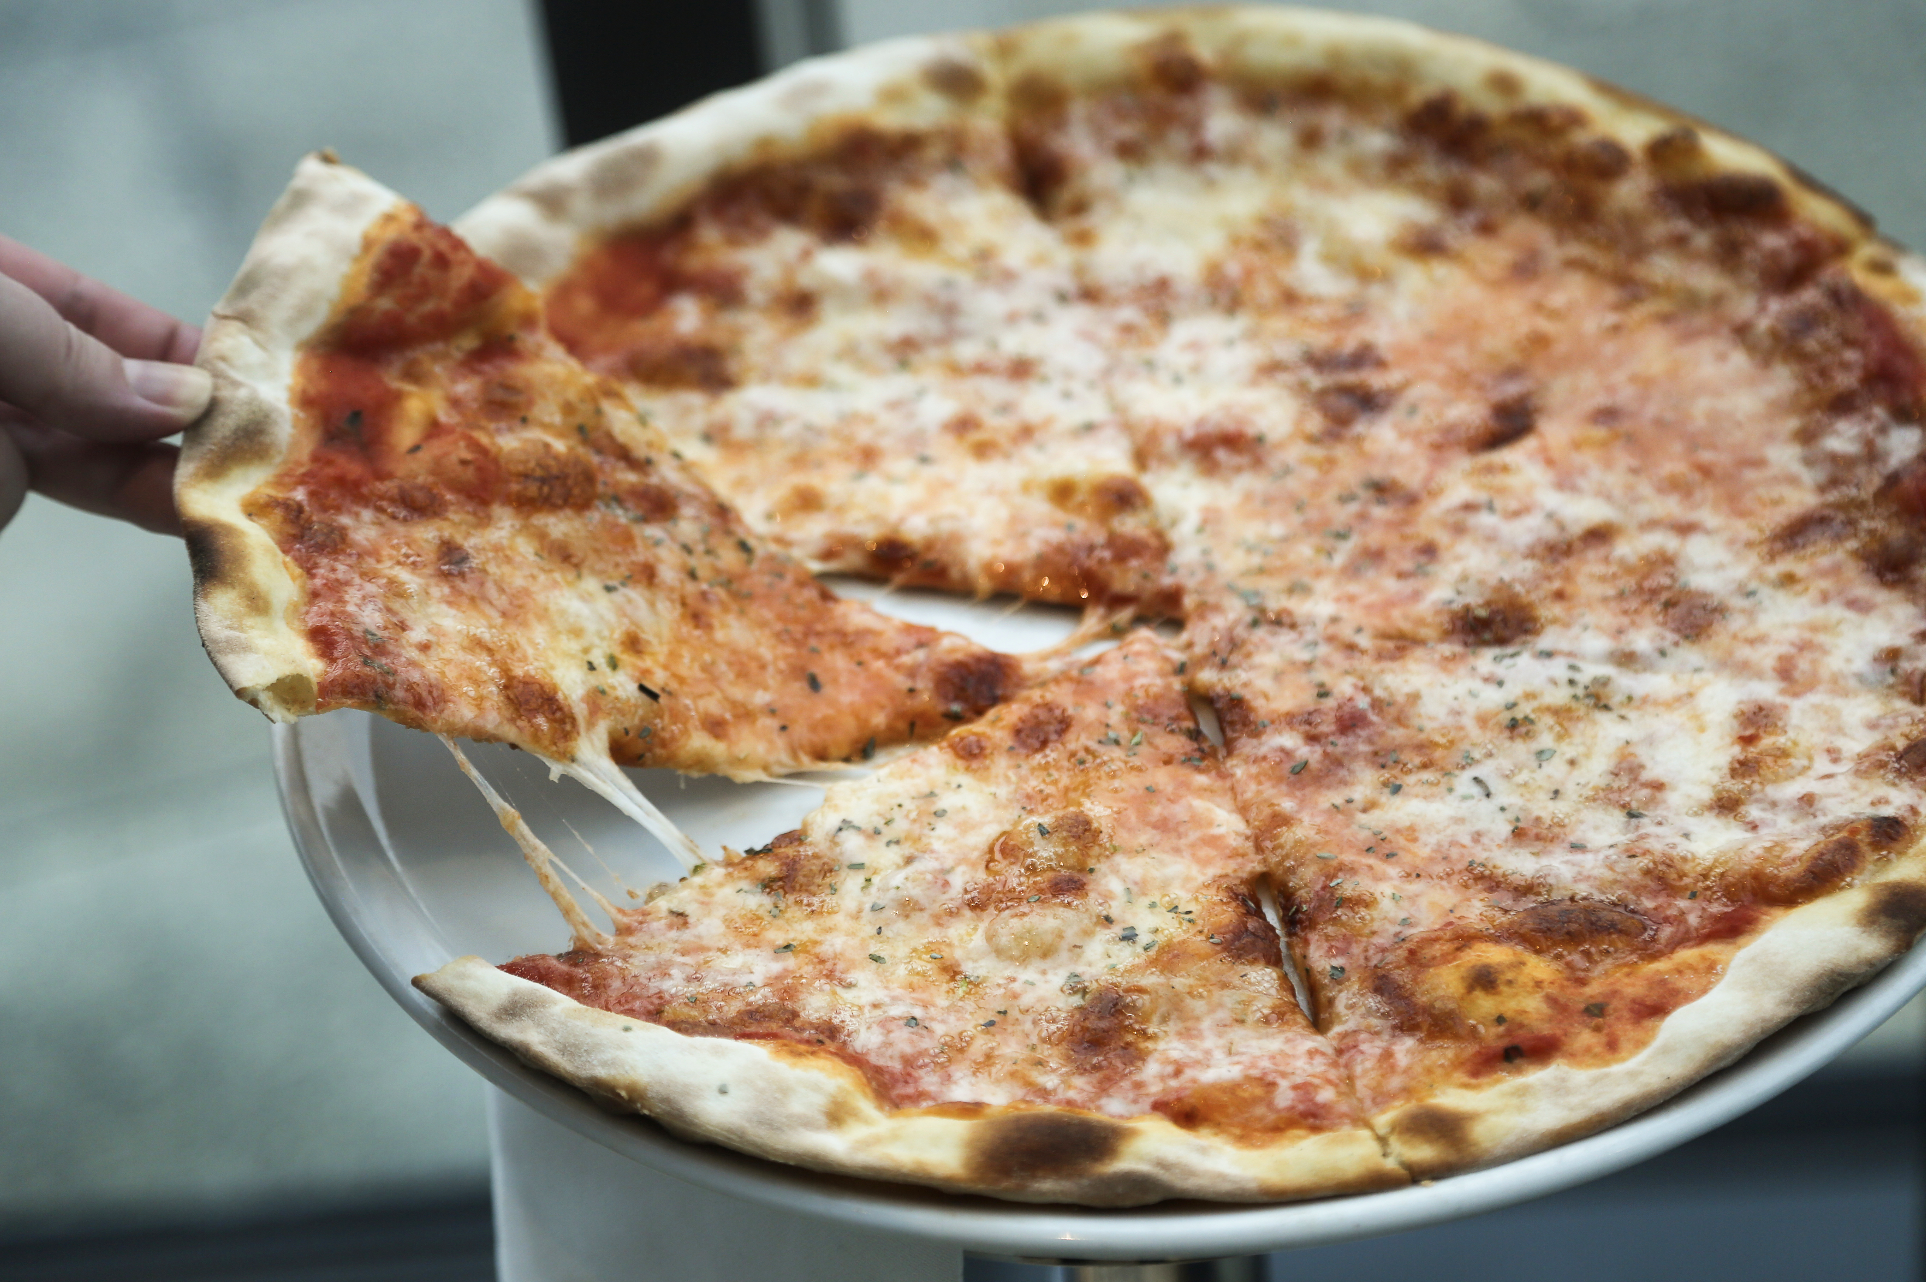 The Serafina team is giving away 500 free pizza slices in NYC tomorrow